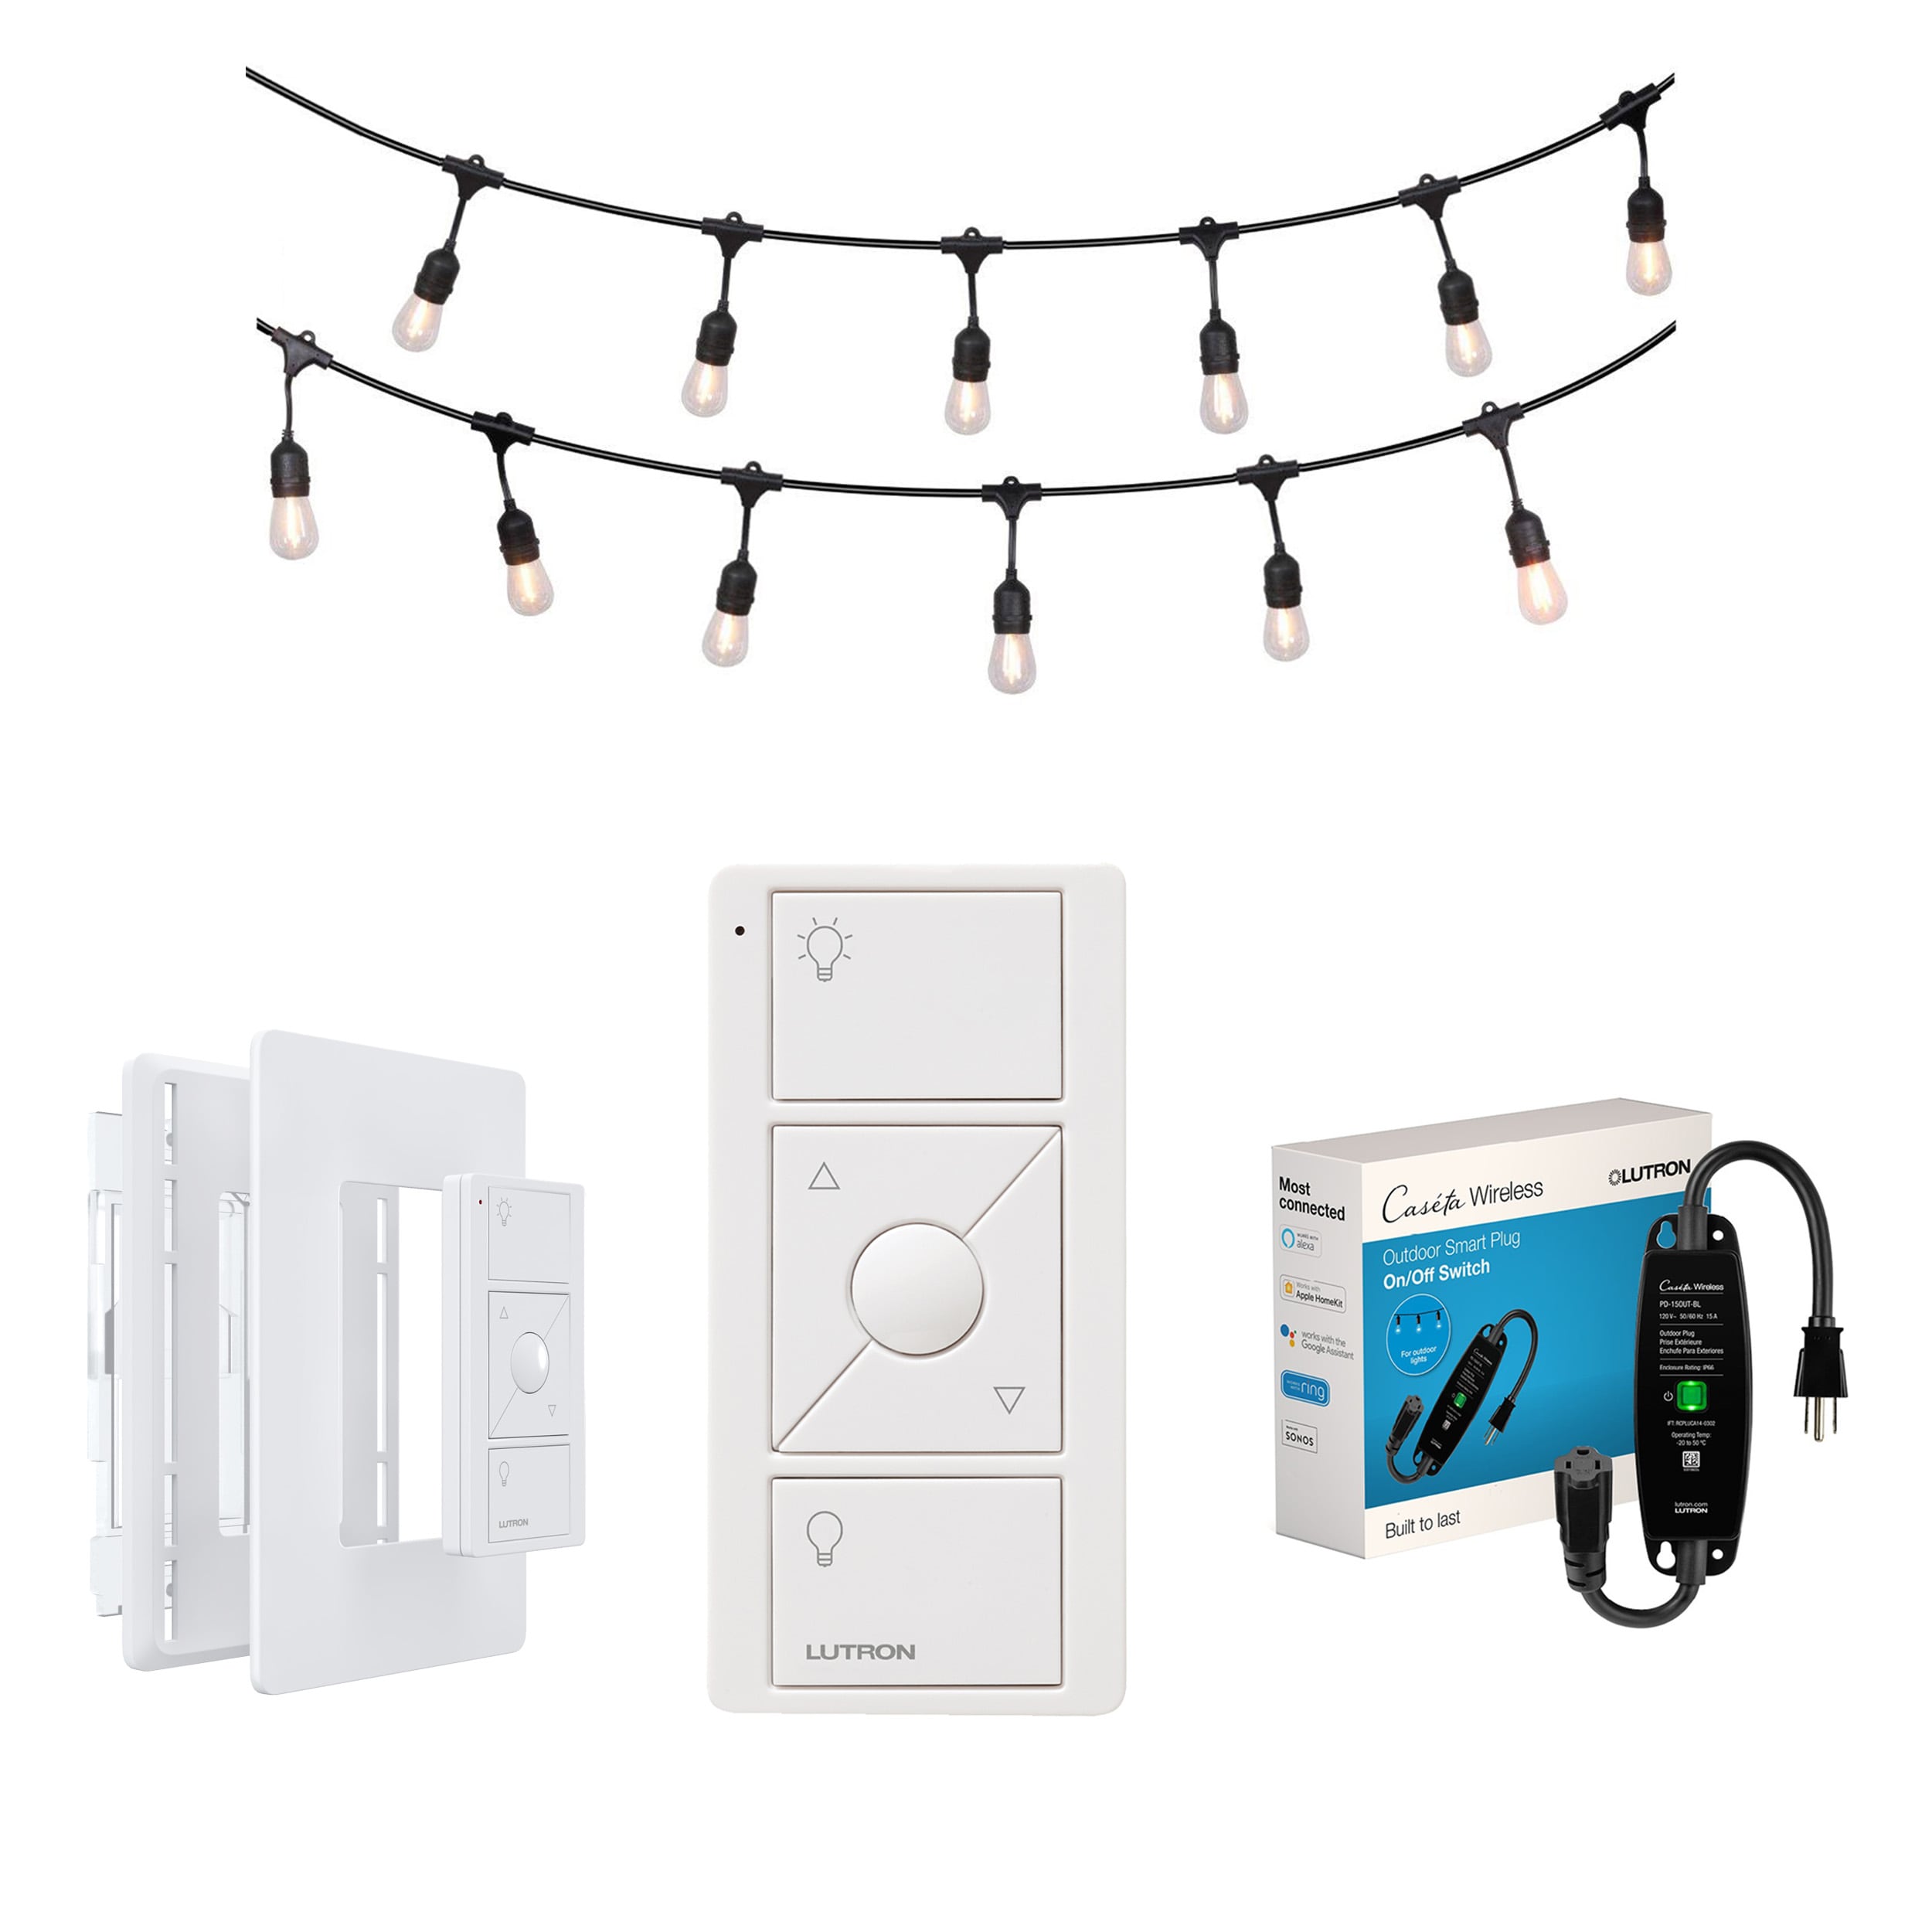 Shop Lutron Caseta Weatherproof Outdoor Smart Plug with Pico Remote for  Landscape and String Lighting Collection at